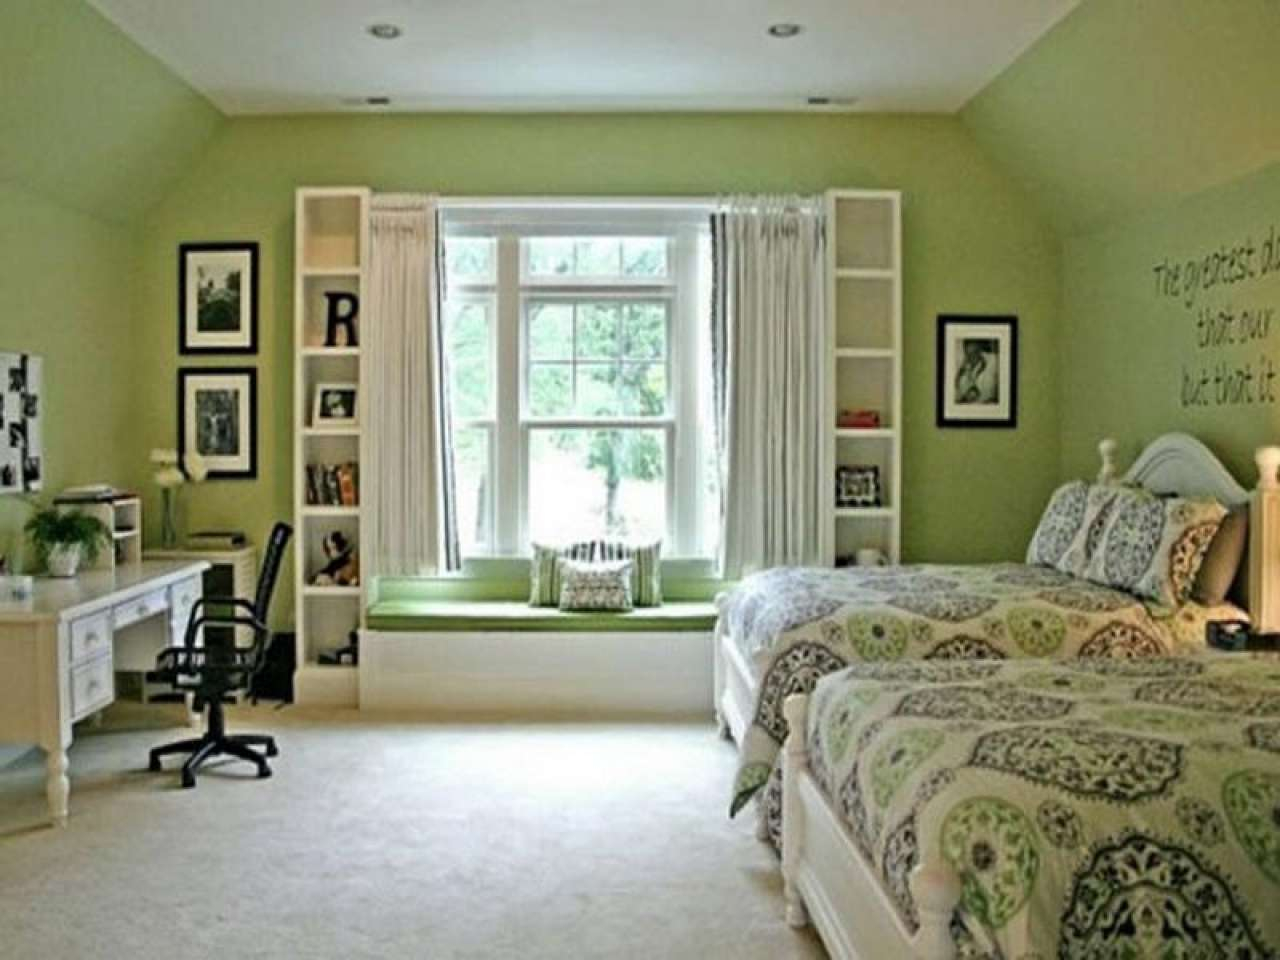 Interior Design Ideas Bedroom with Maximum Relaxation Support